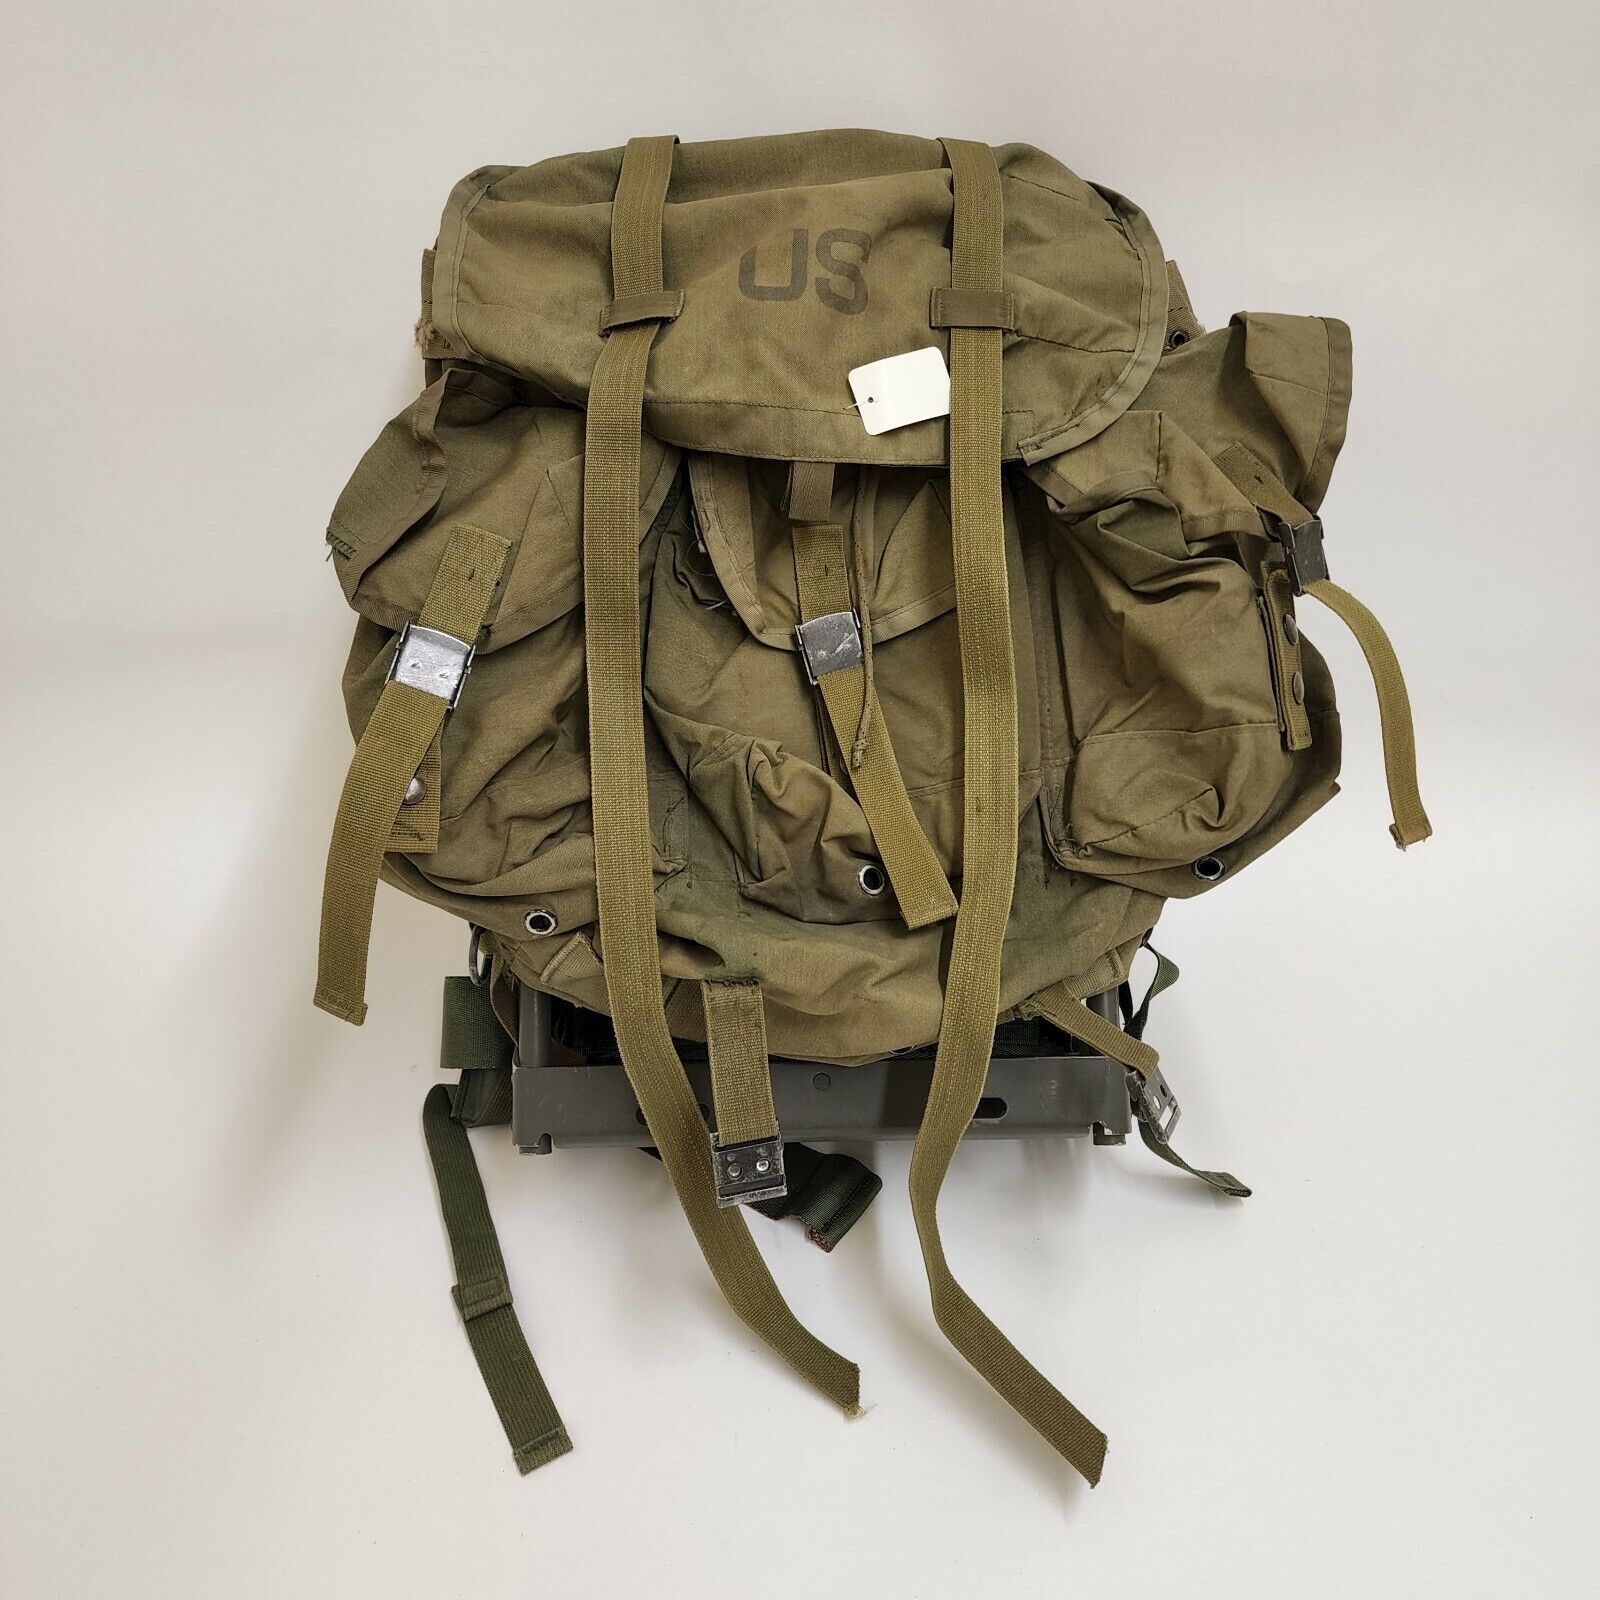 Military Alice Pack (Medium), Complete with Frame & Straps